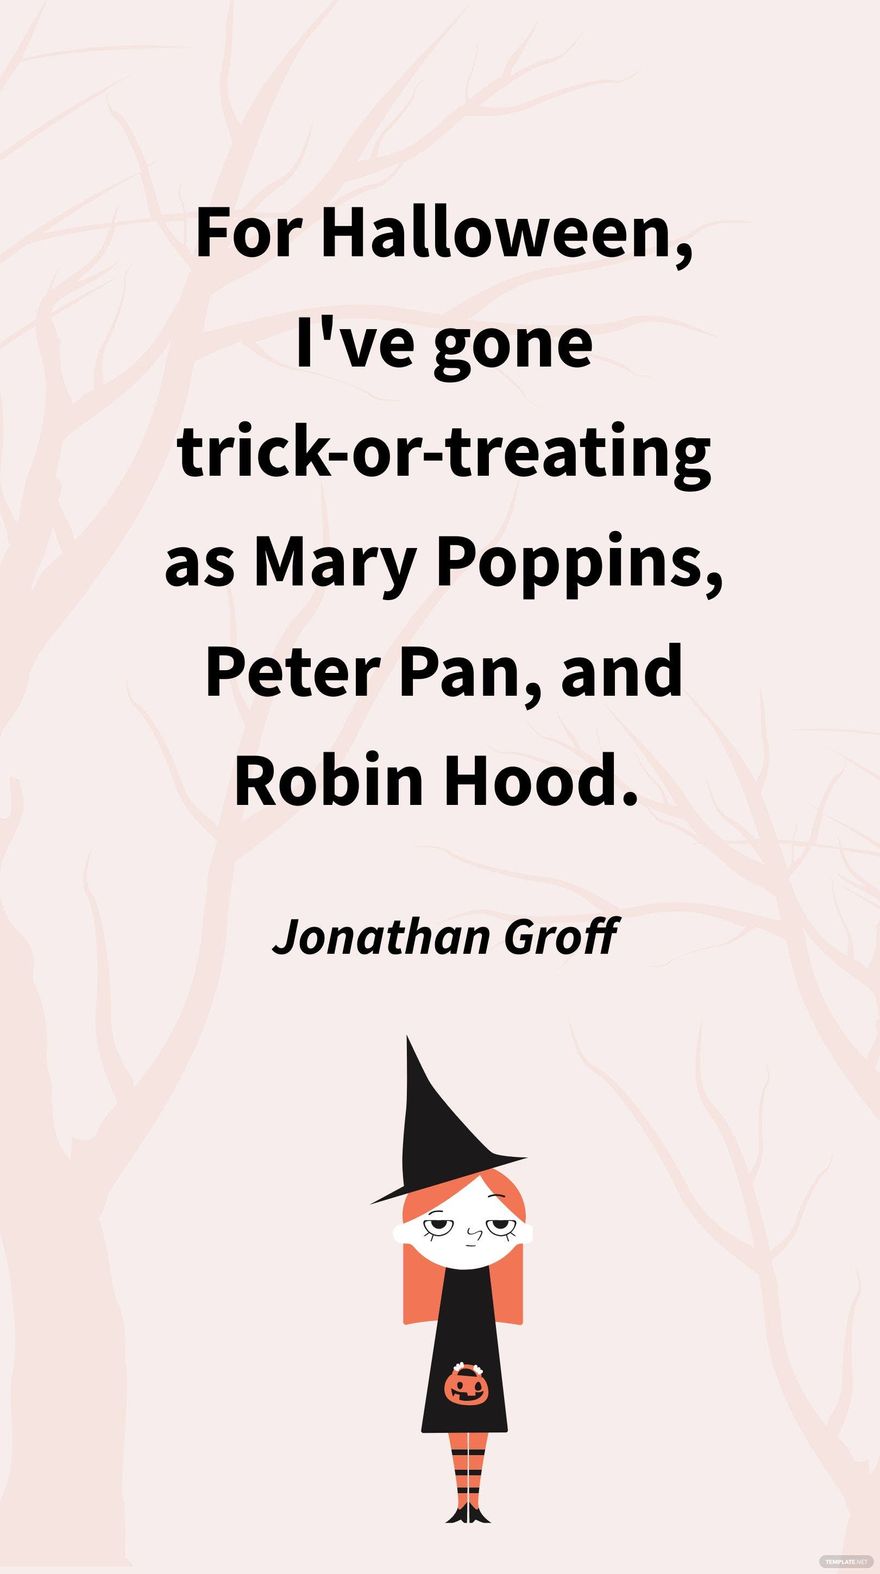 Free Jonathan Groff - For Halloween, I've gone trick-or-treating as Mary Poppins, Peter Pan, and Robin Hood.